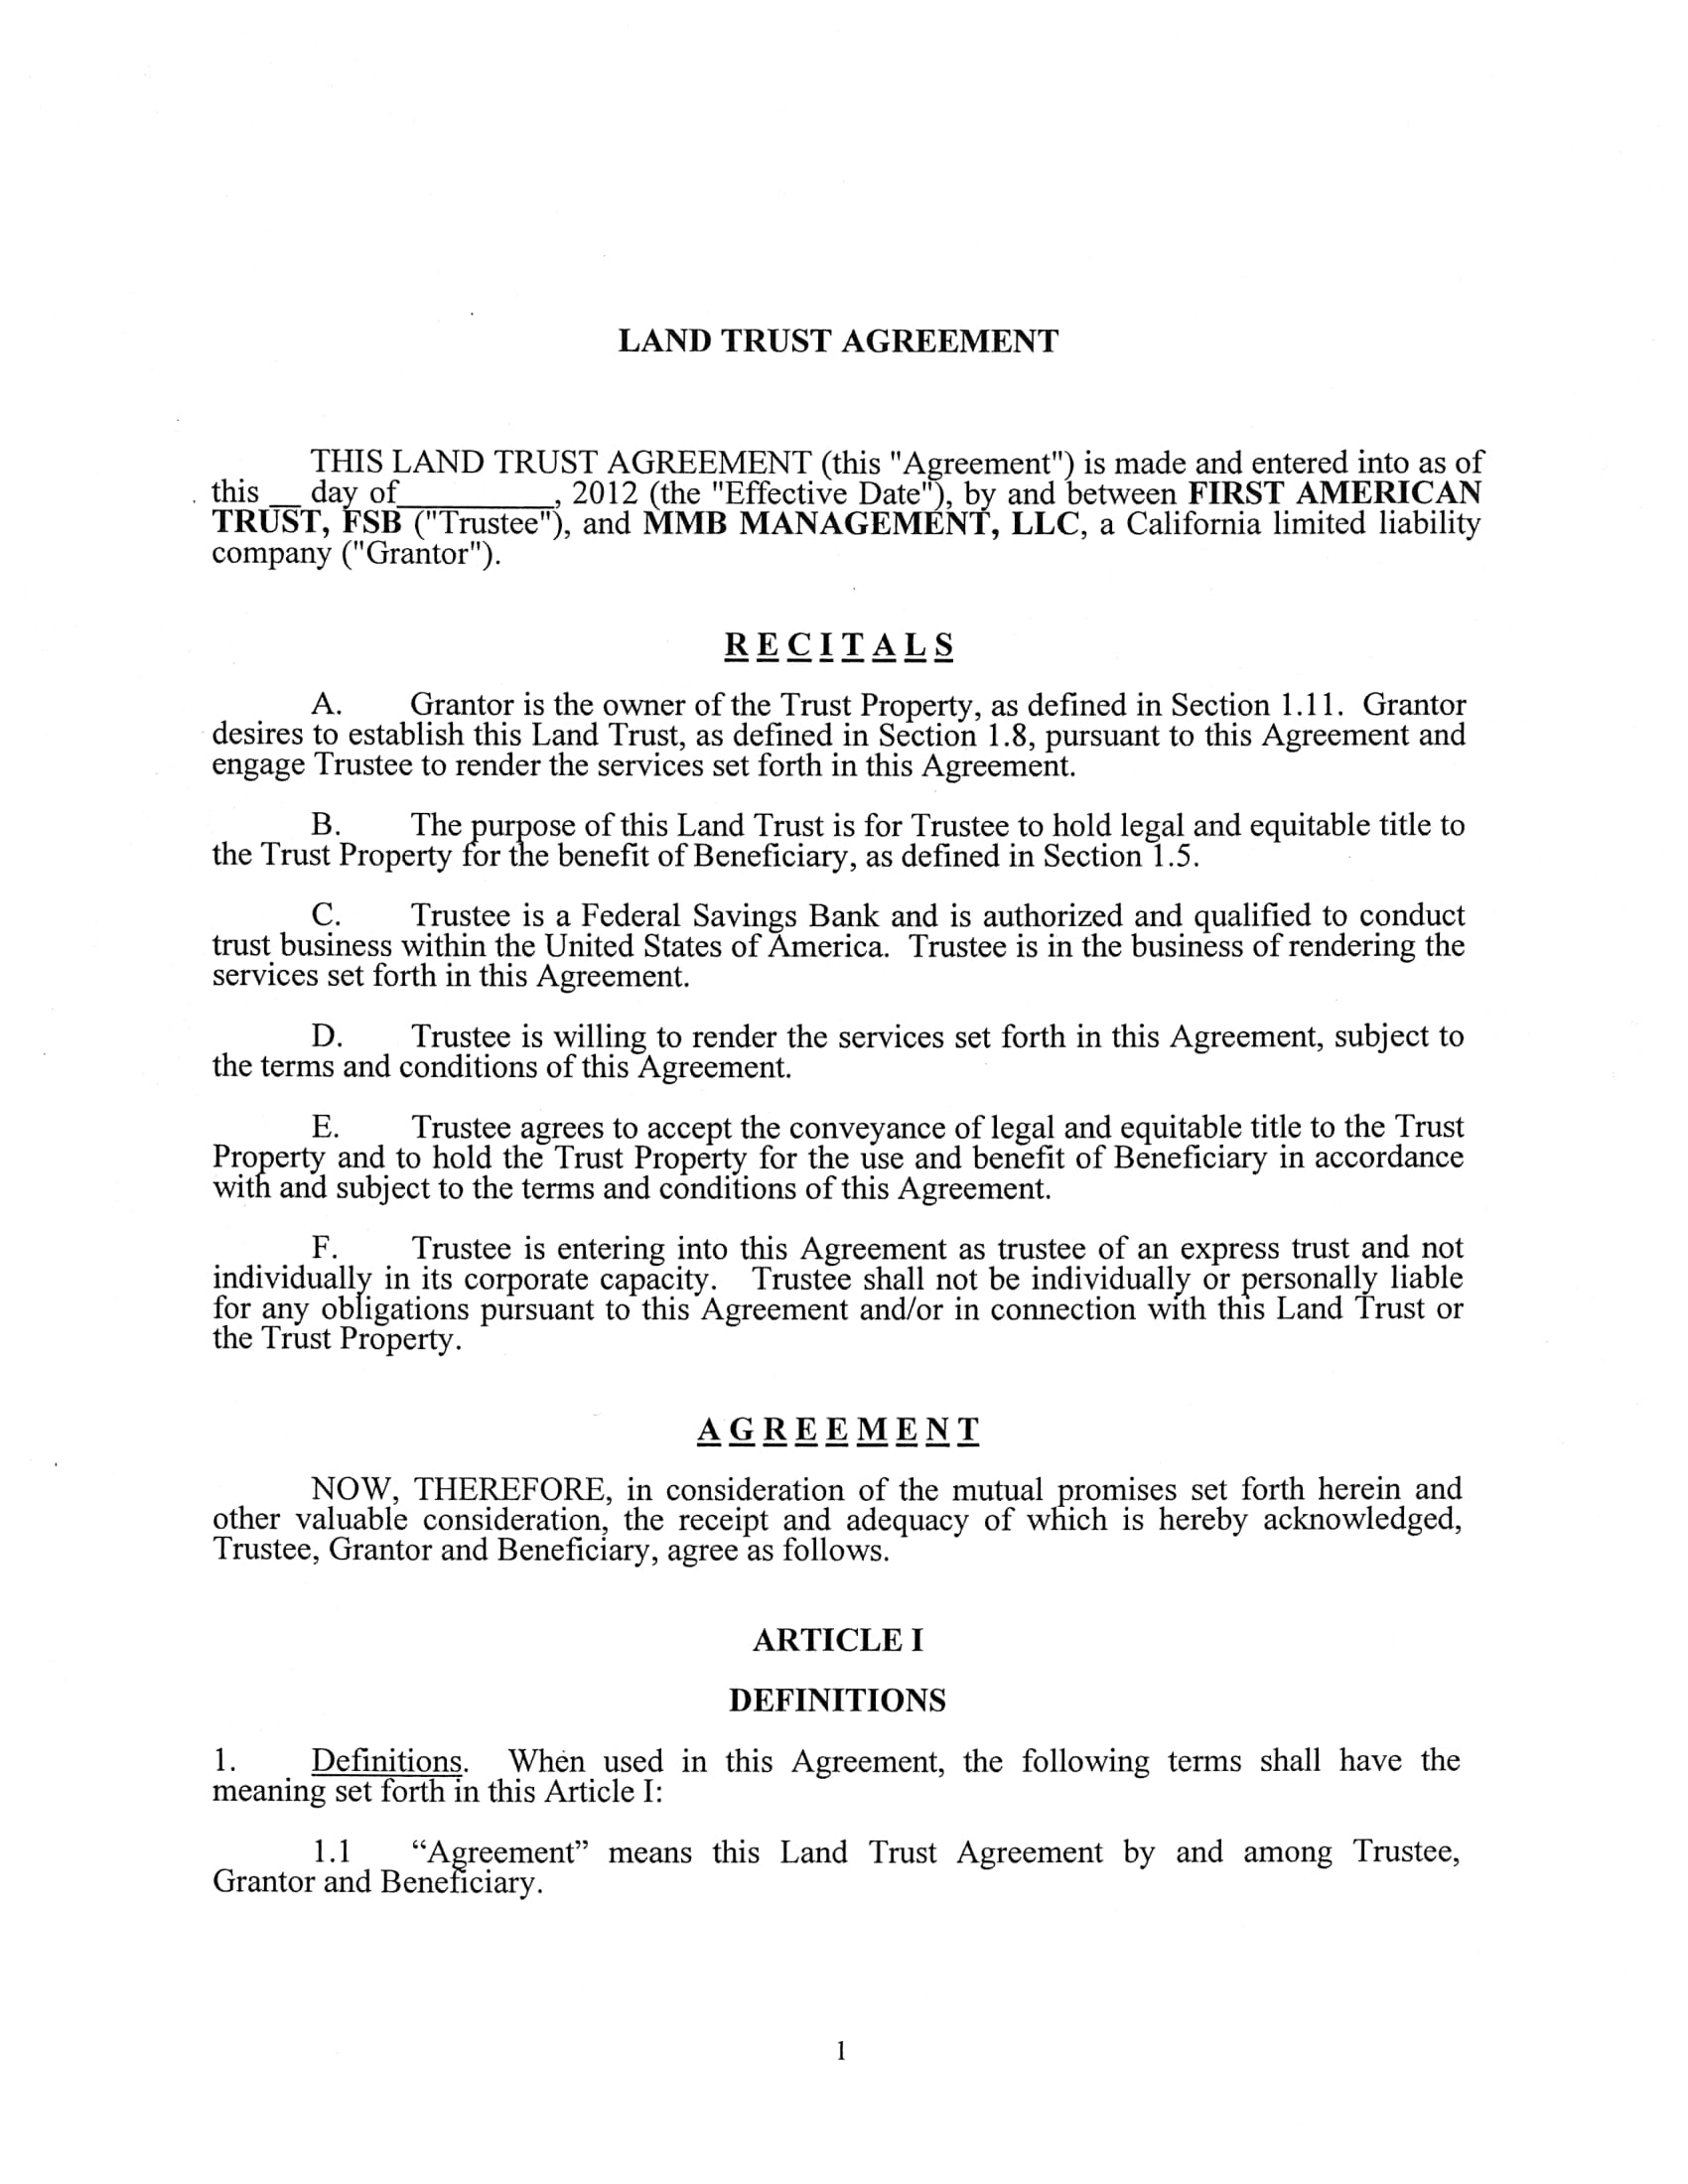 land trust agreement contract form 02